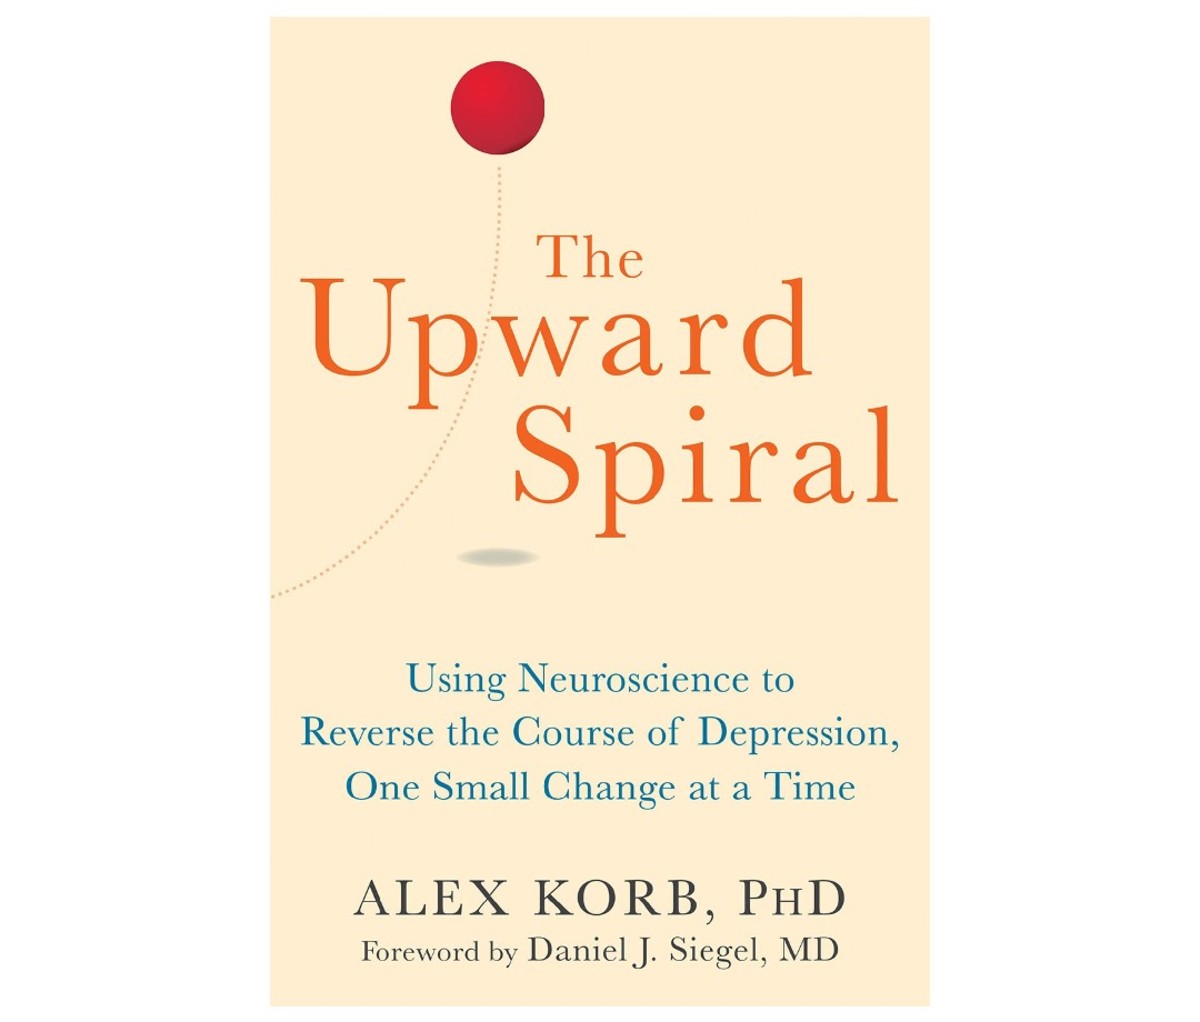 Upward spiral: Reversing the course of depression with neuroscience, one small change after the other by Alex Korb